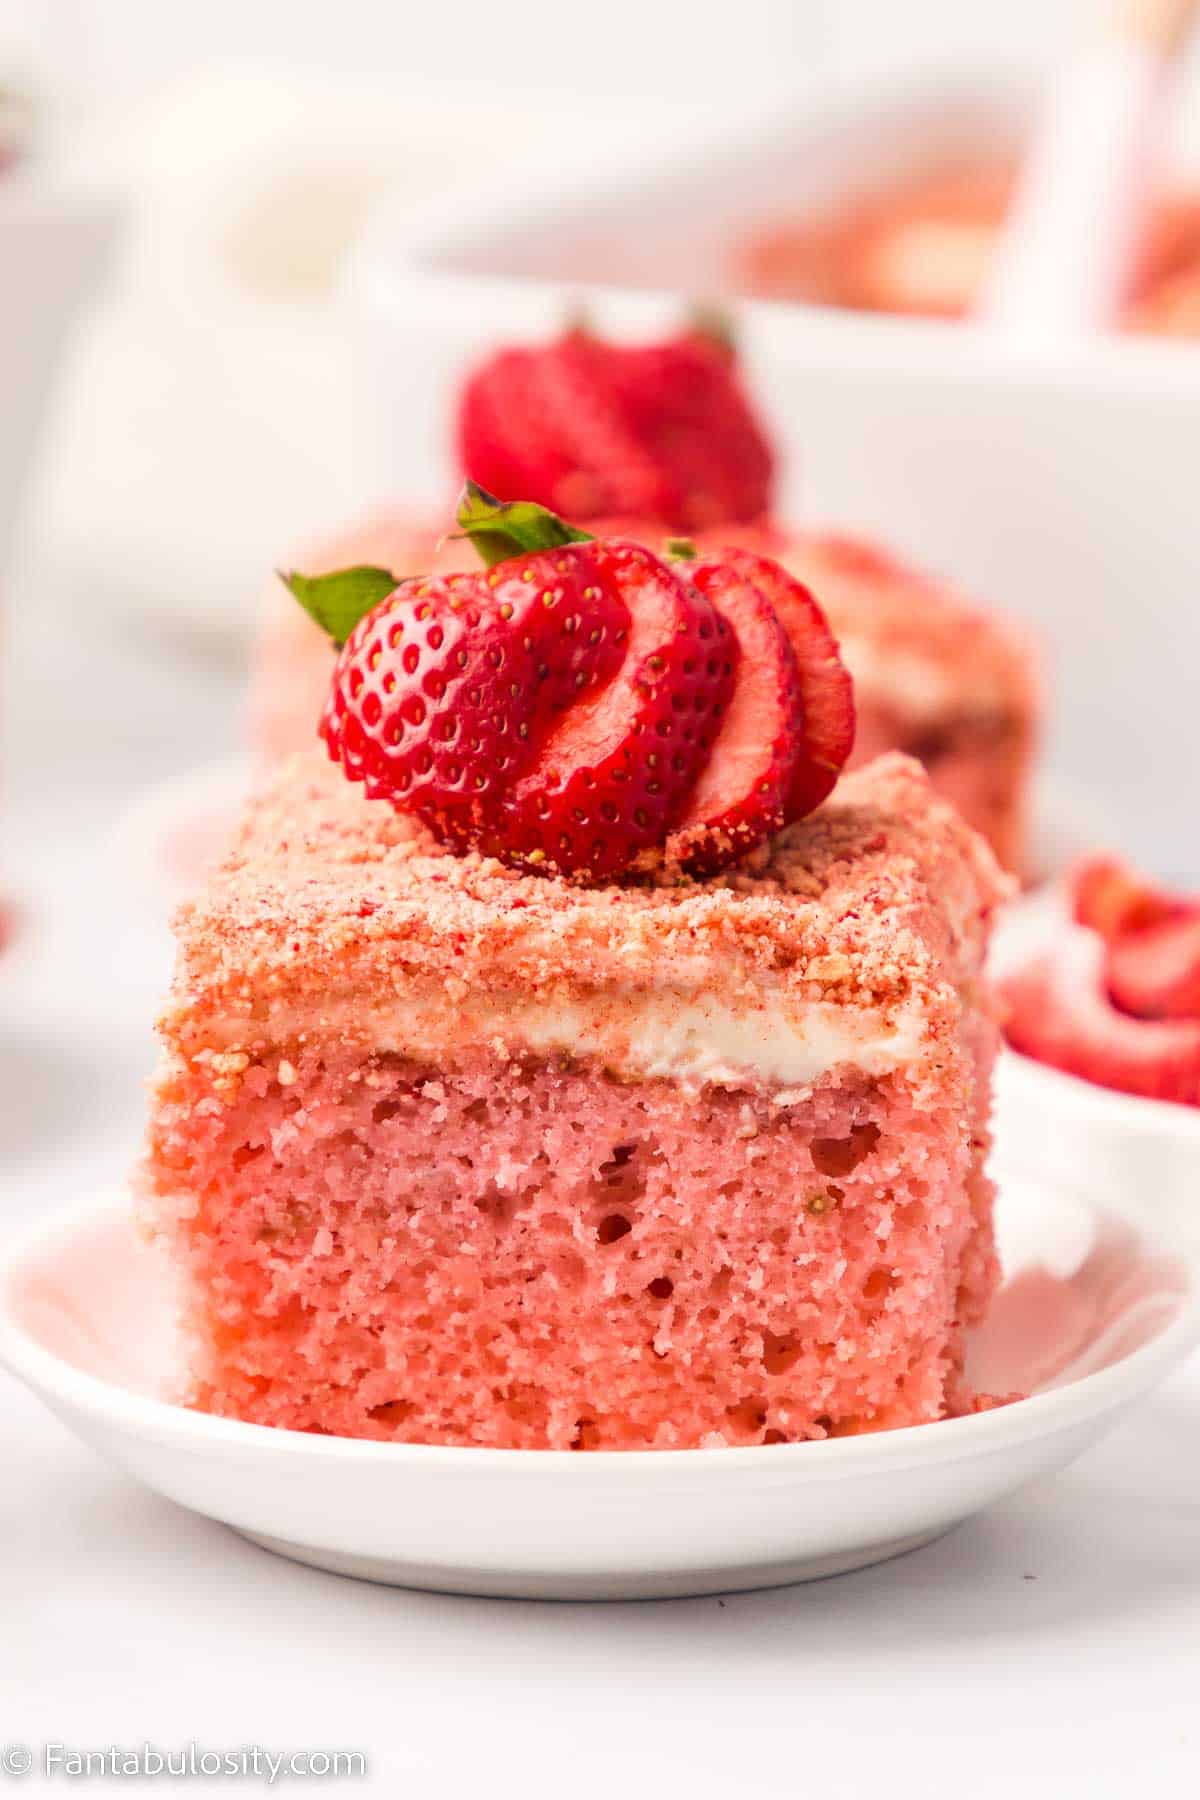 Slice of strawberry crunch cake on white plate, with fresh strawberries on top.